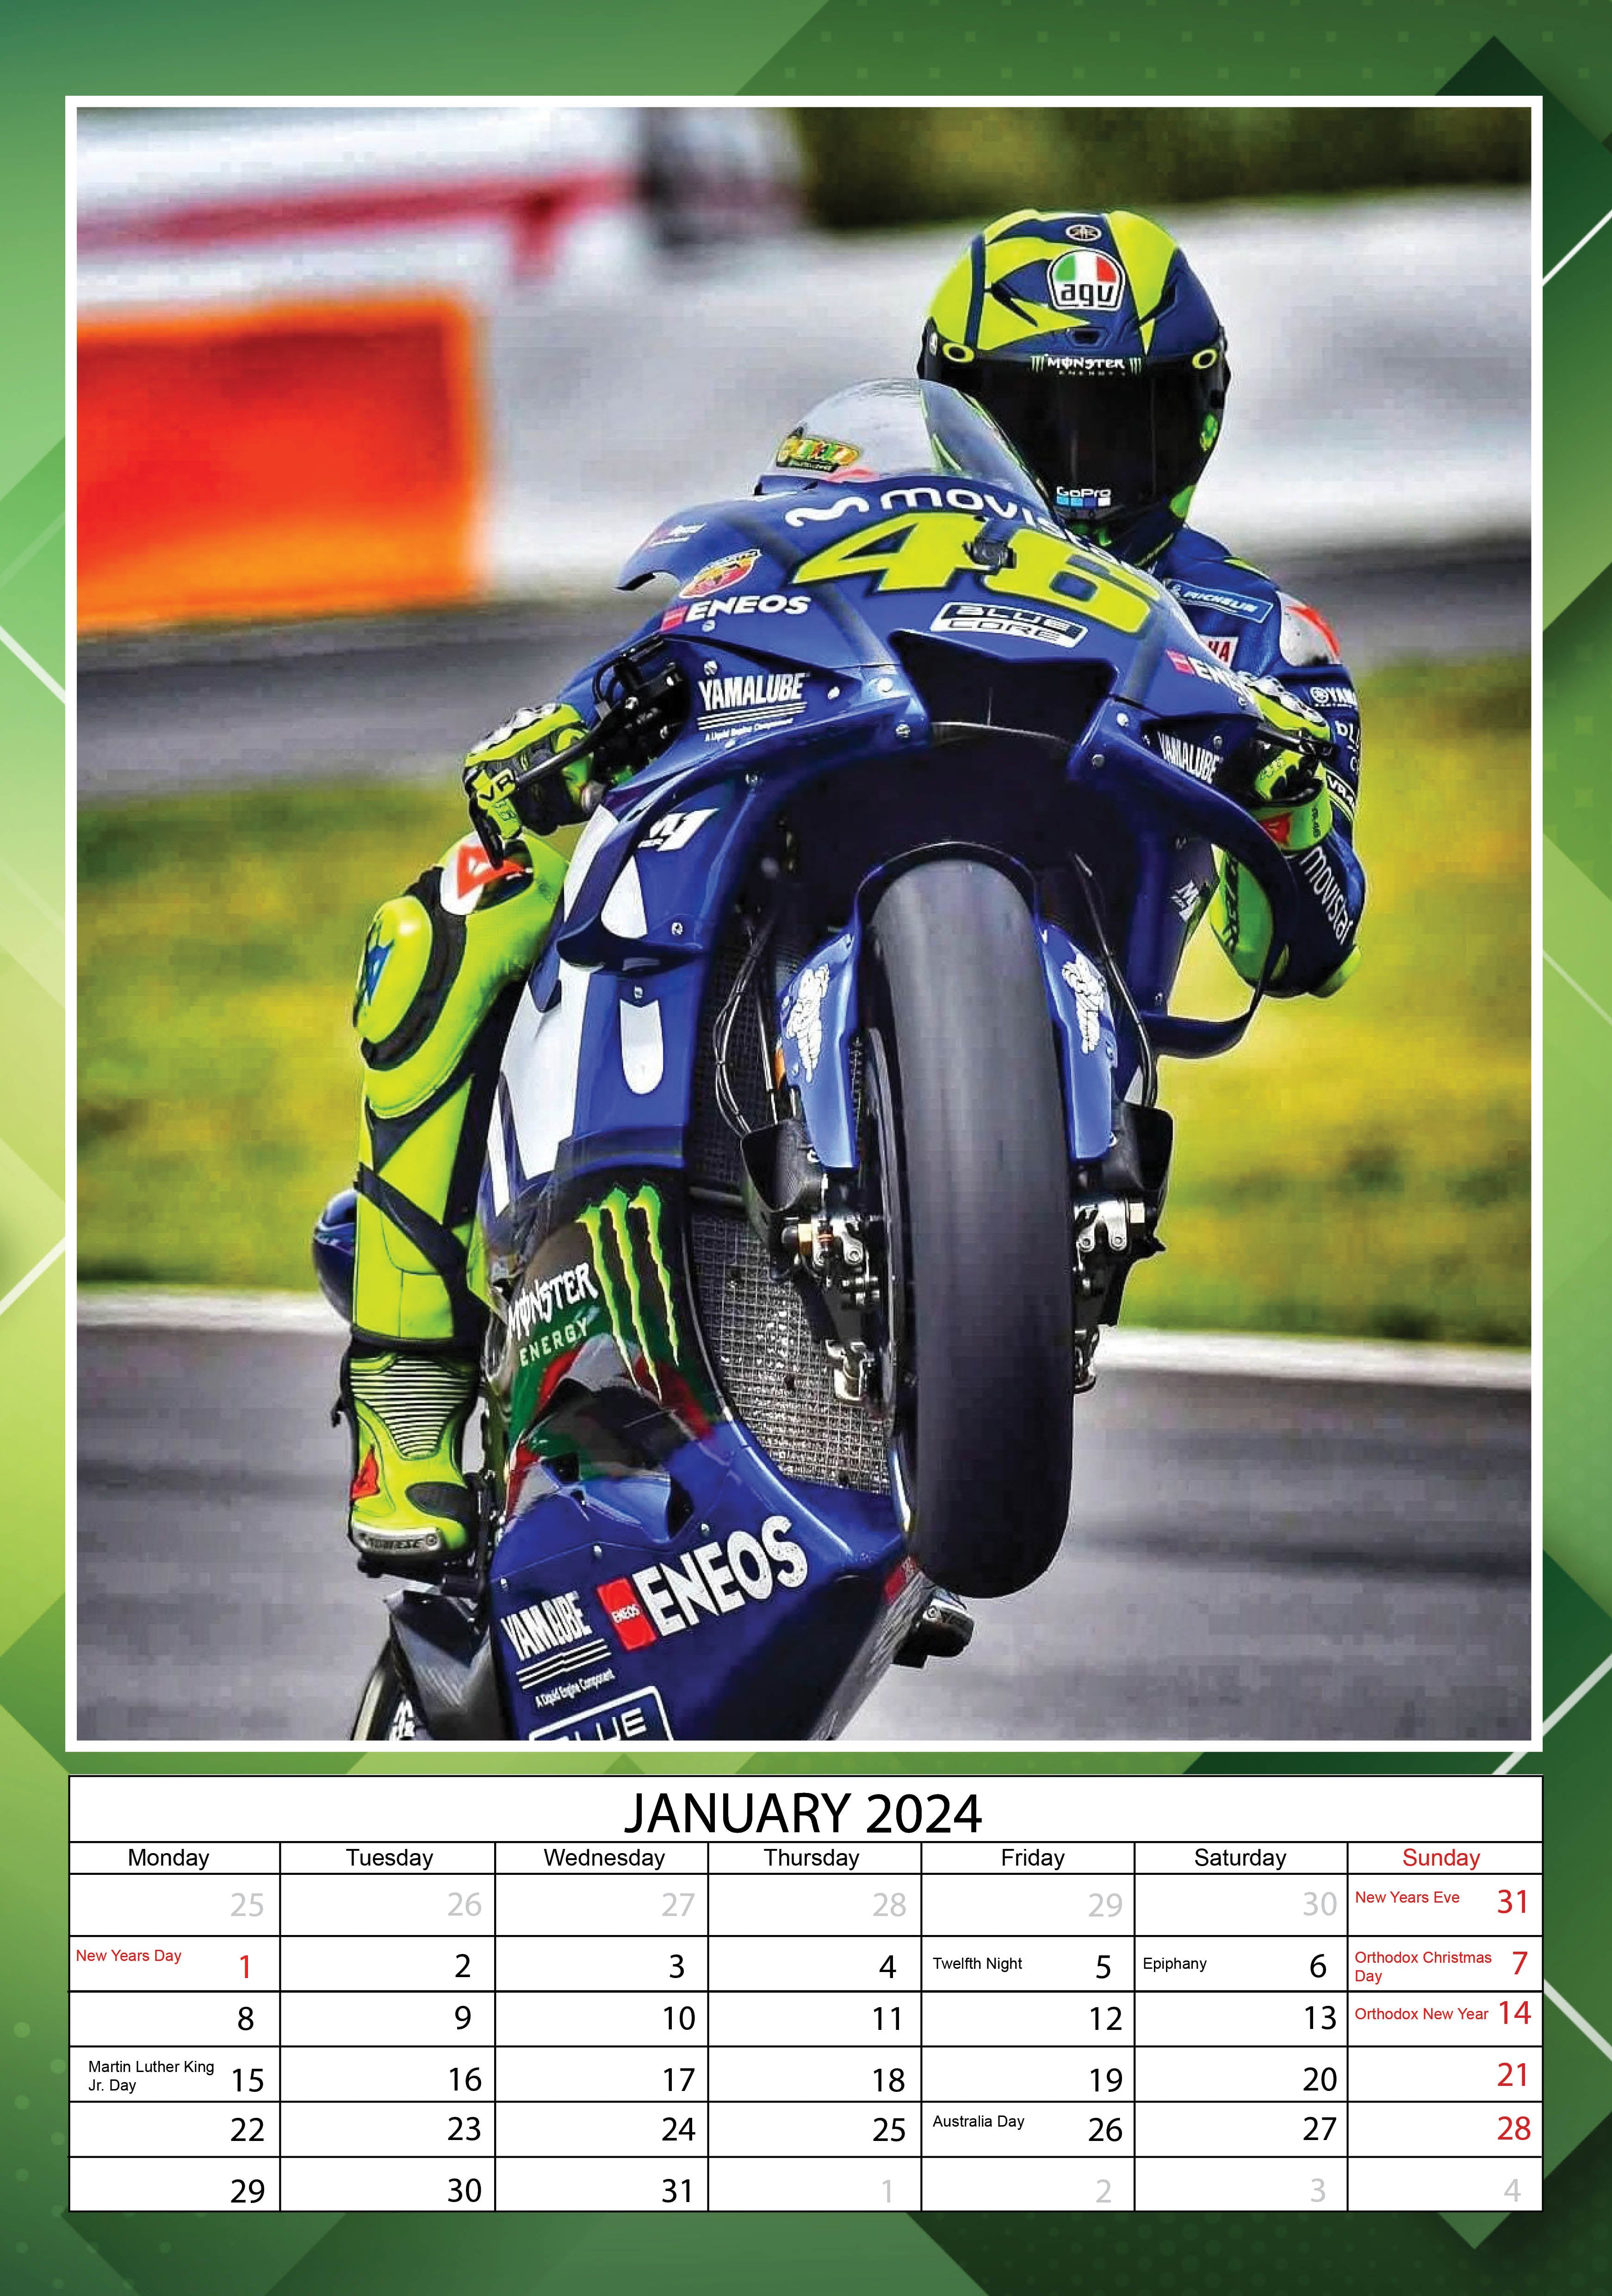 2024 Valentino Rossi A3 Wall Calendar Athletes Calendars by Call